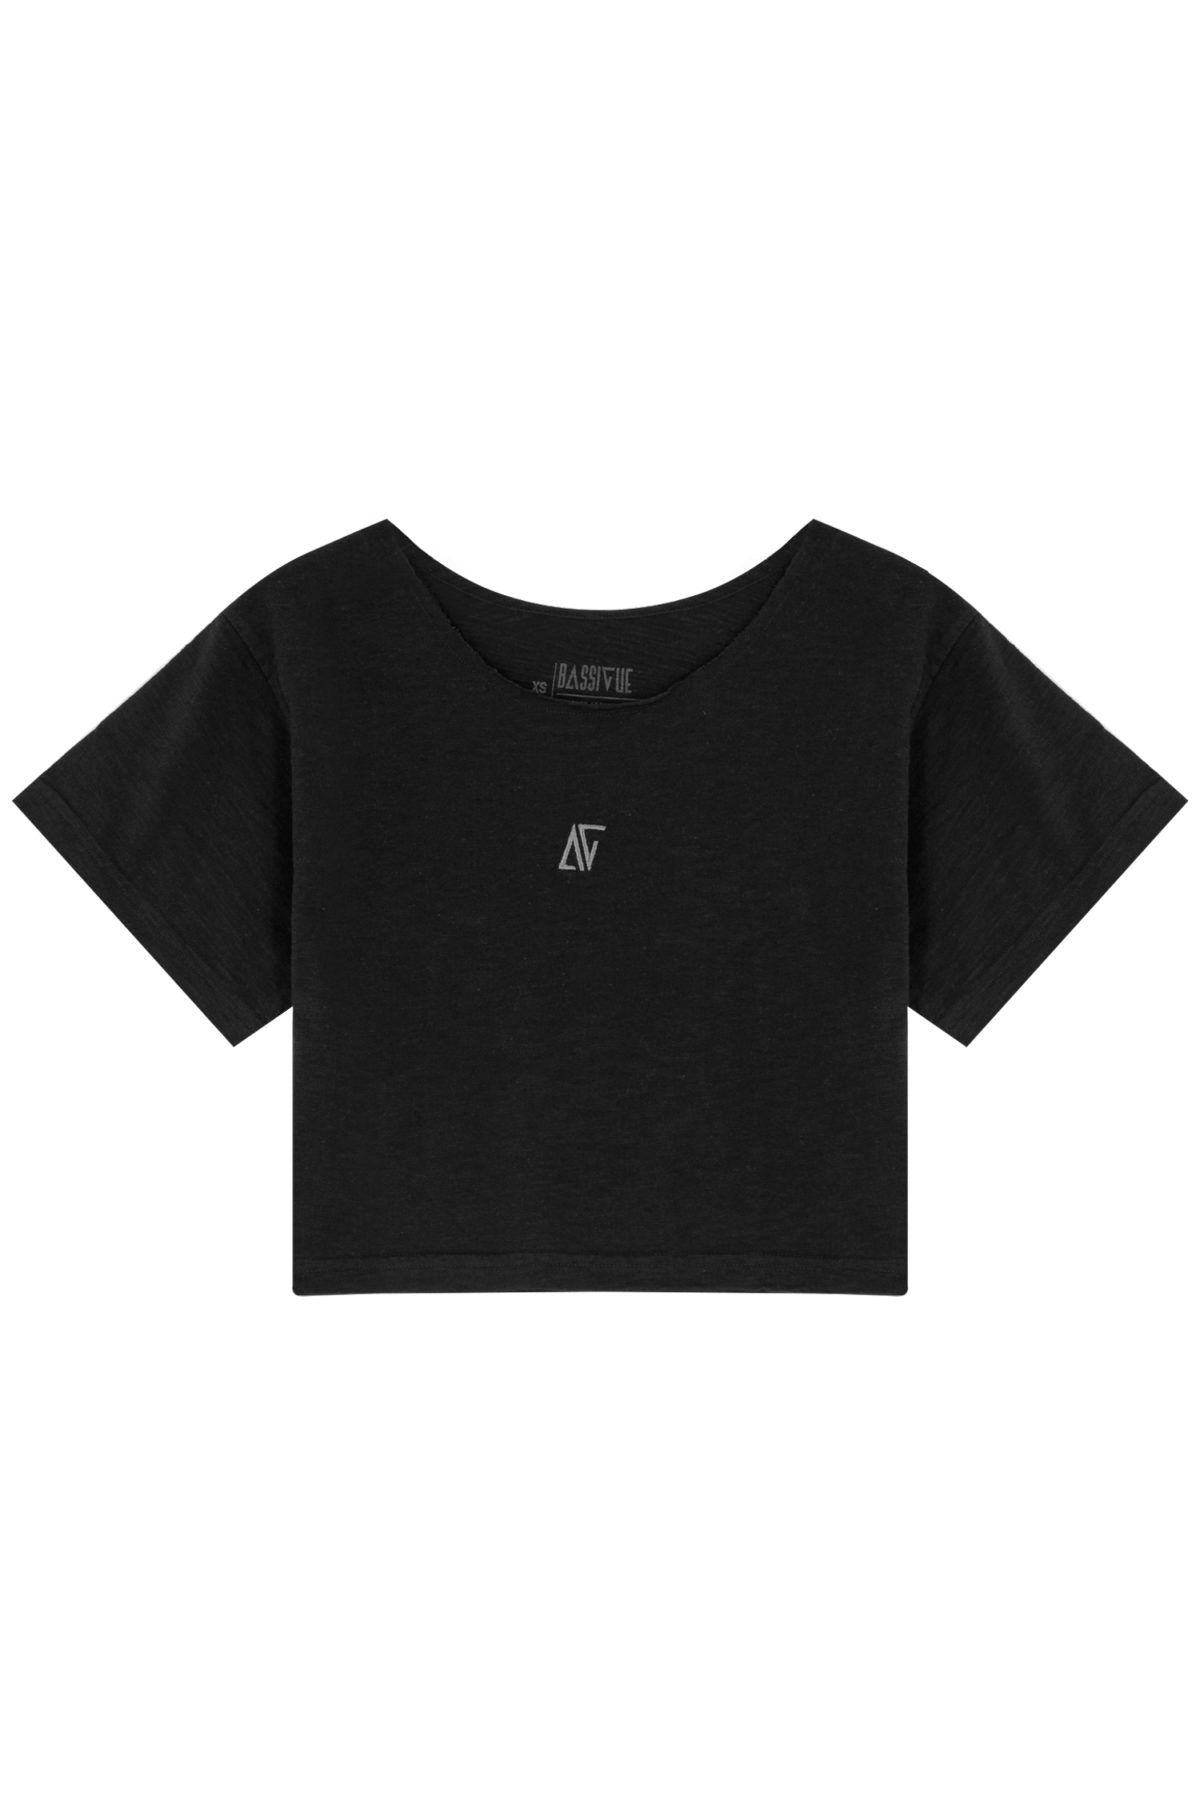 Load image into Gallery viewer, Cotton Crop T-Shirt - Black
